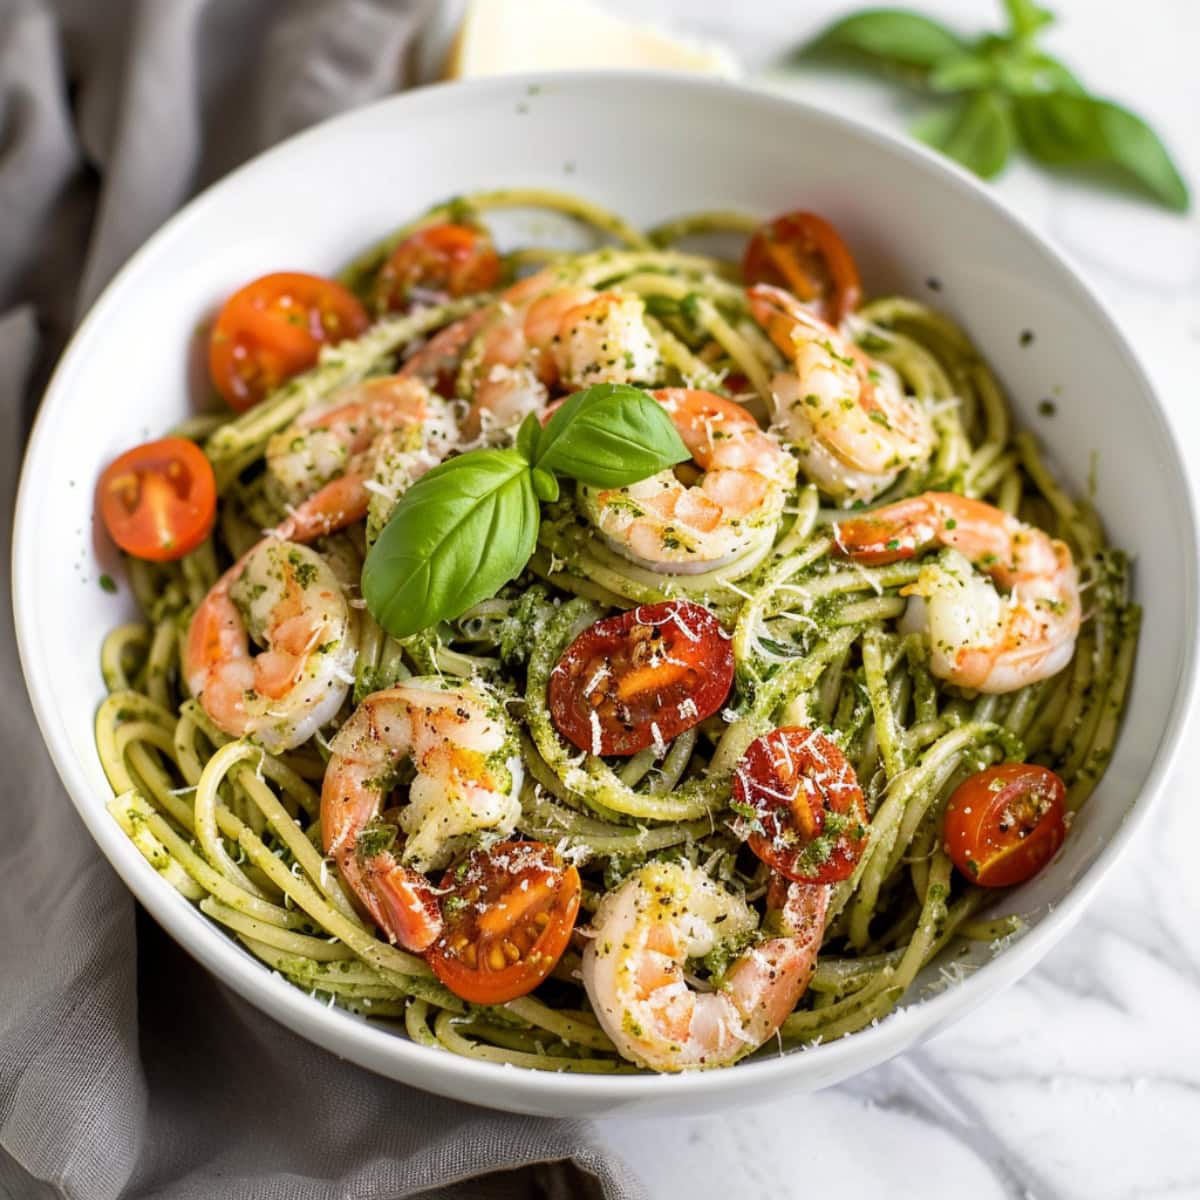 Spaghetti pasta with pesto, tomatoes and basil in a bowl.